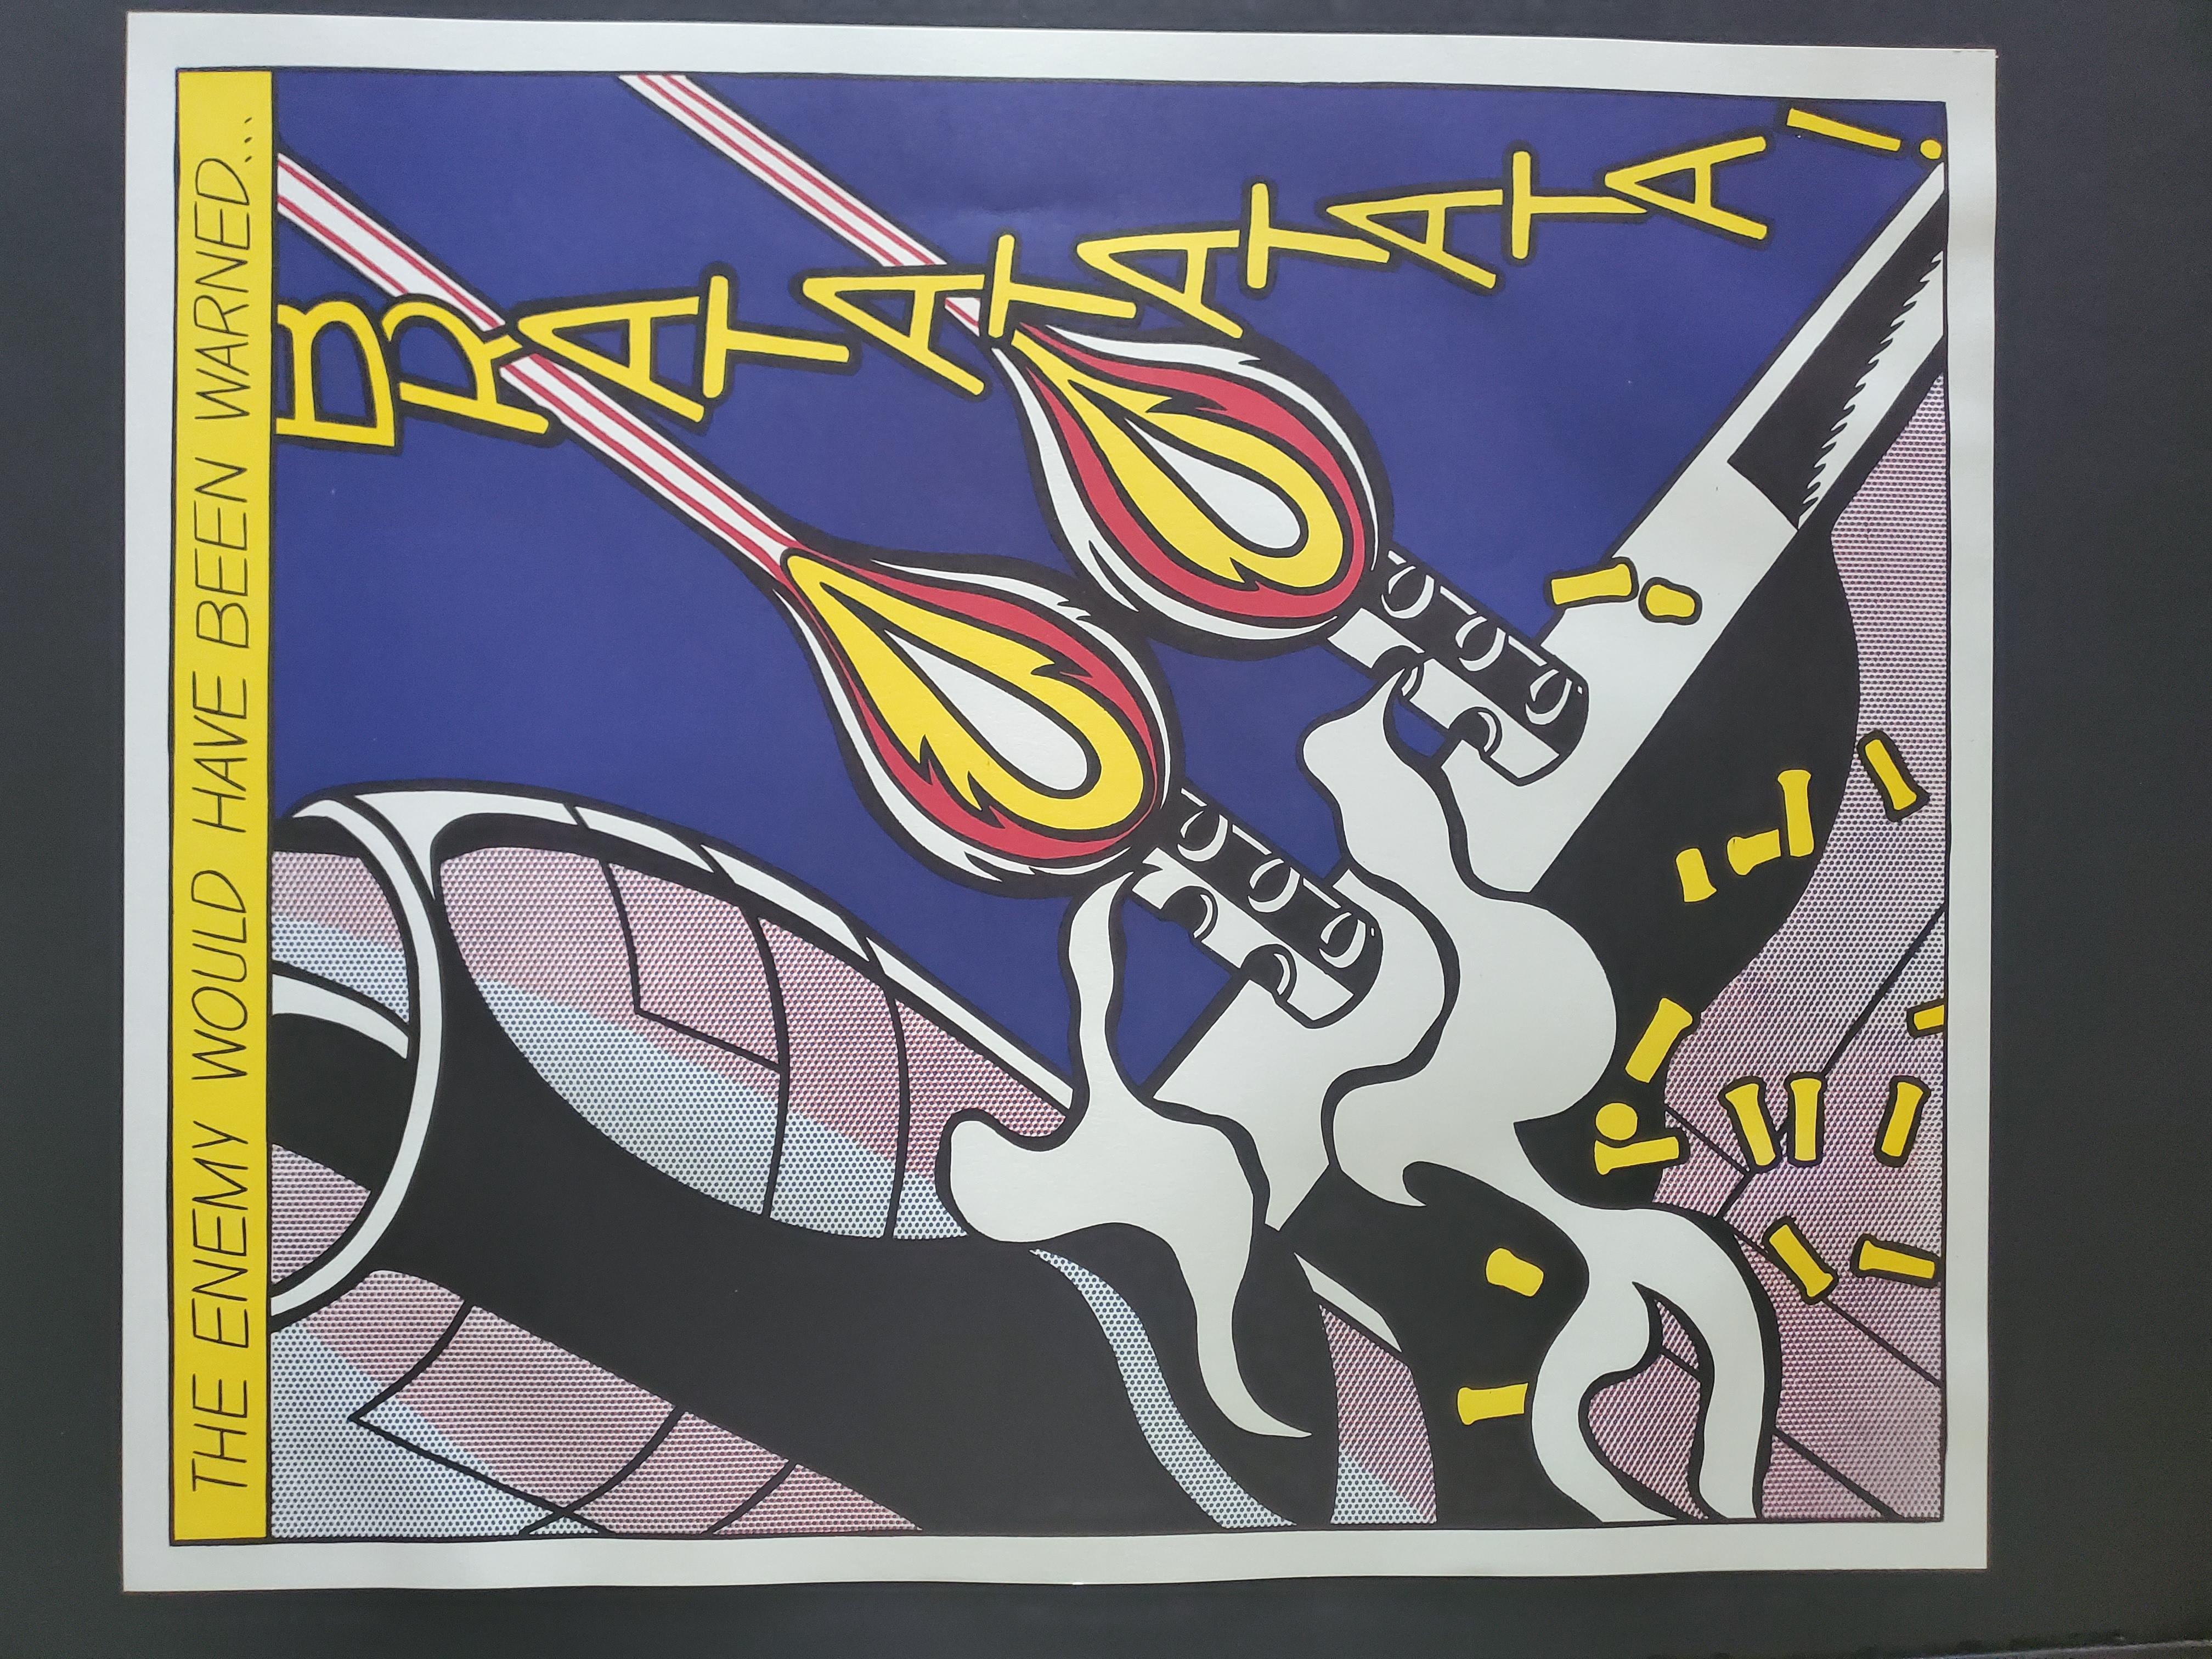 ROY LICHTENSTEIN 'AS I OPENED FIRE' TRIPTYCH SET OF 3, SIGNED (RIGHT PANEL) 1966 For Sale 1